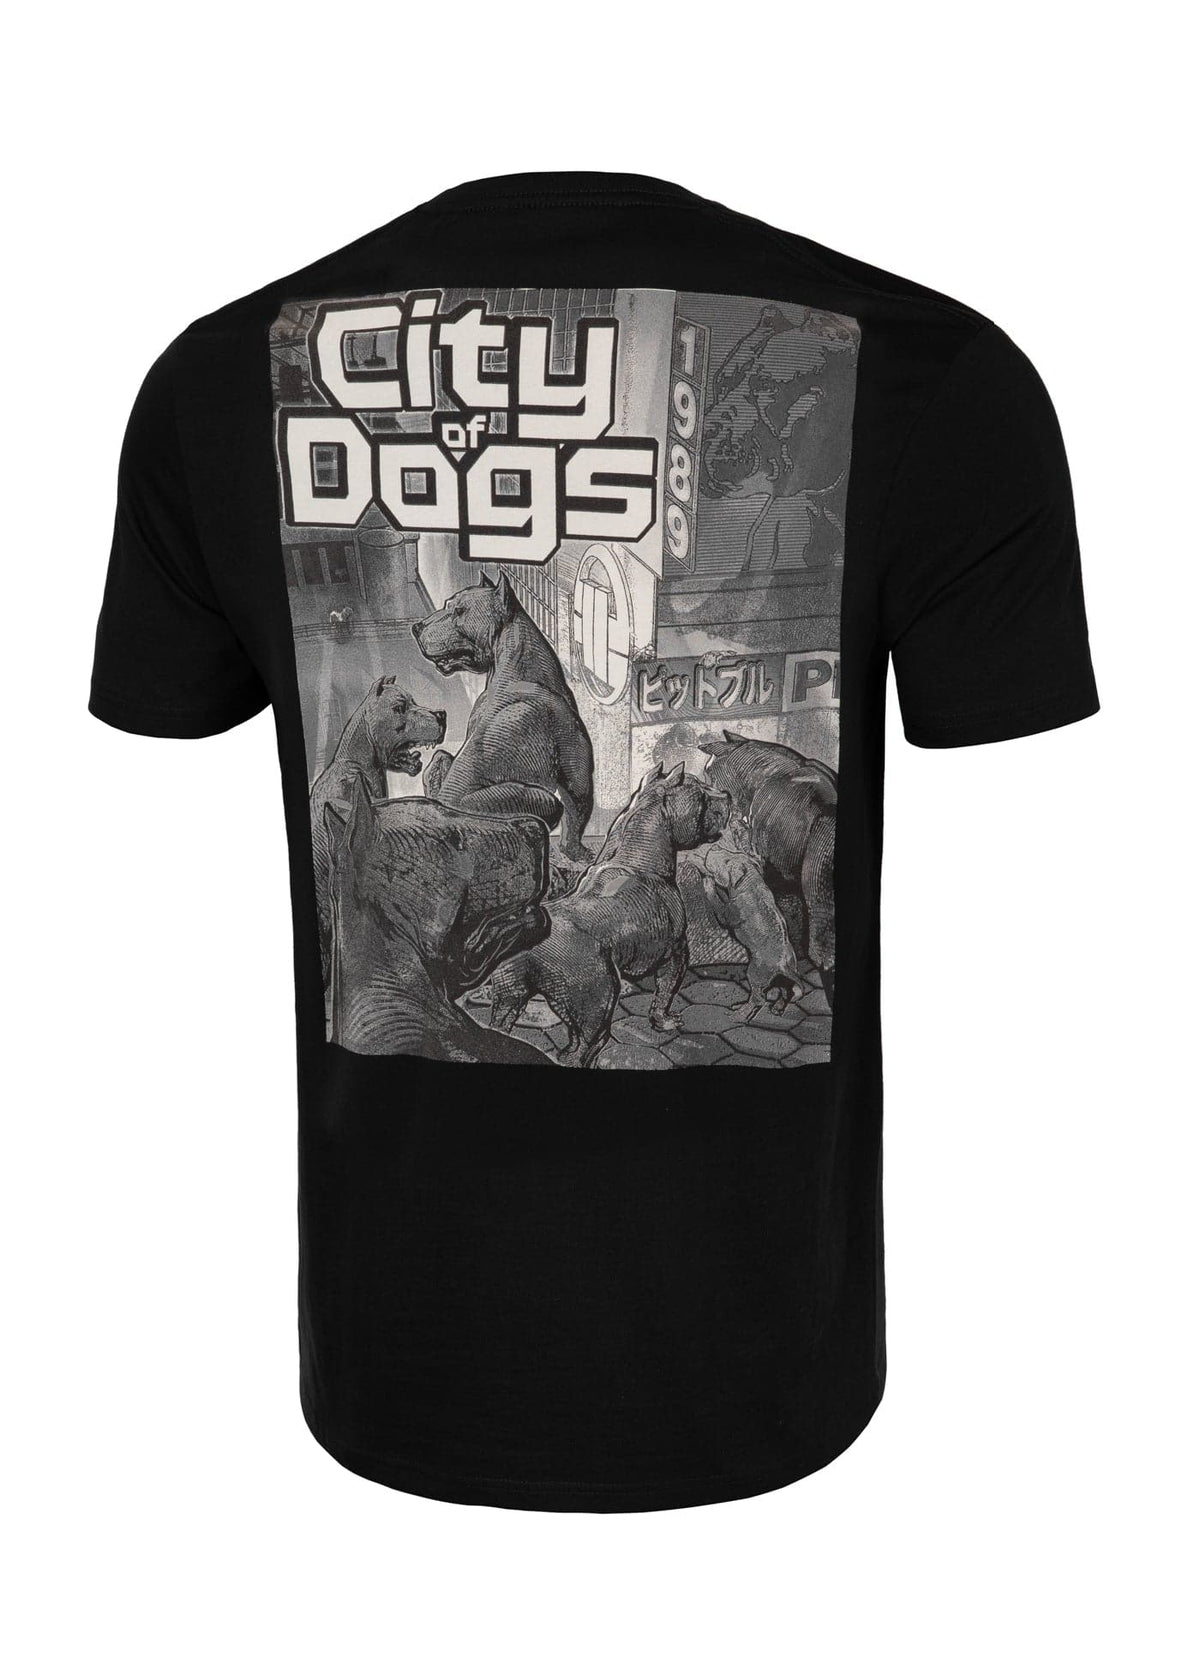 CITY OF DOGS Black T-shirt